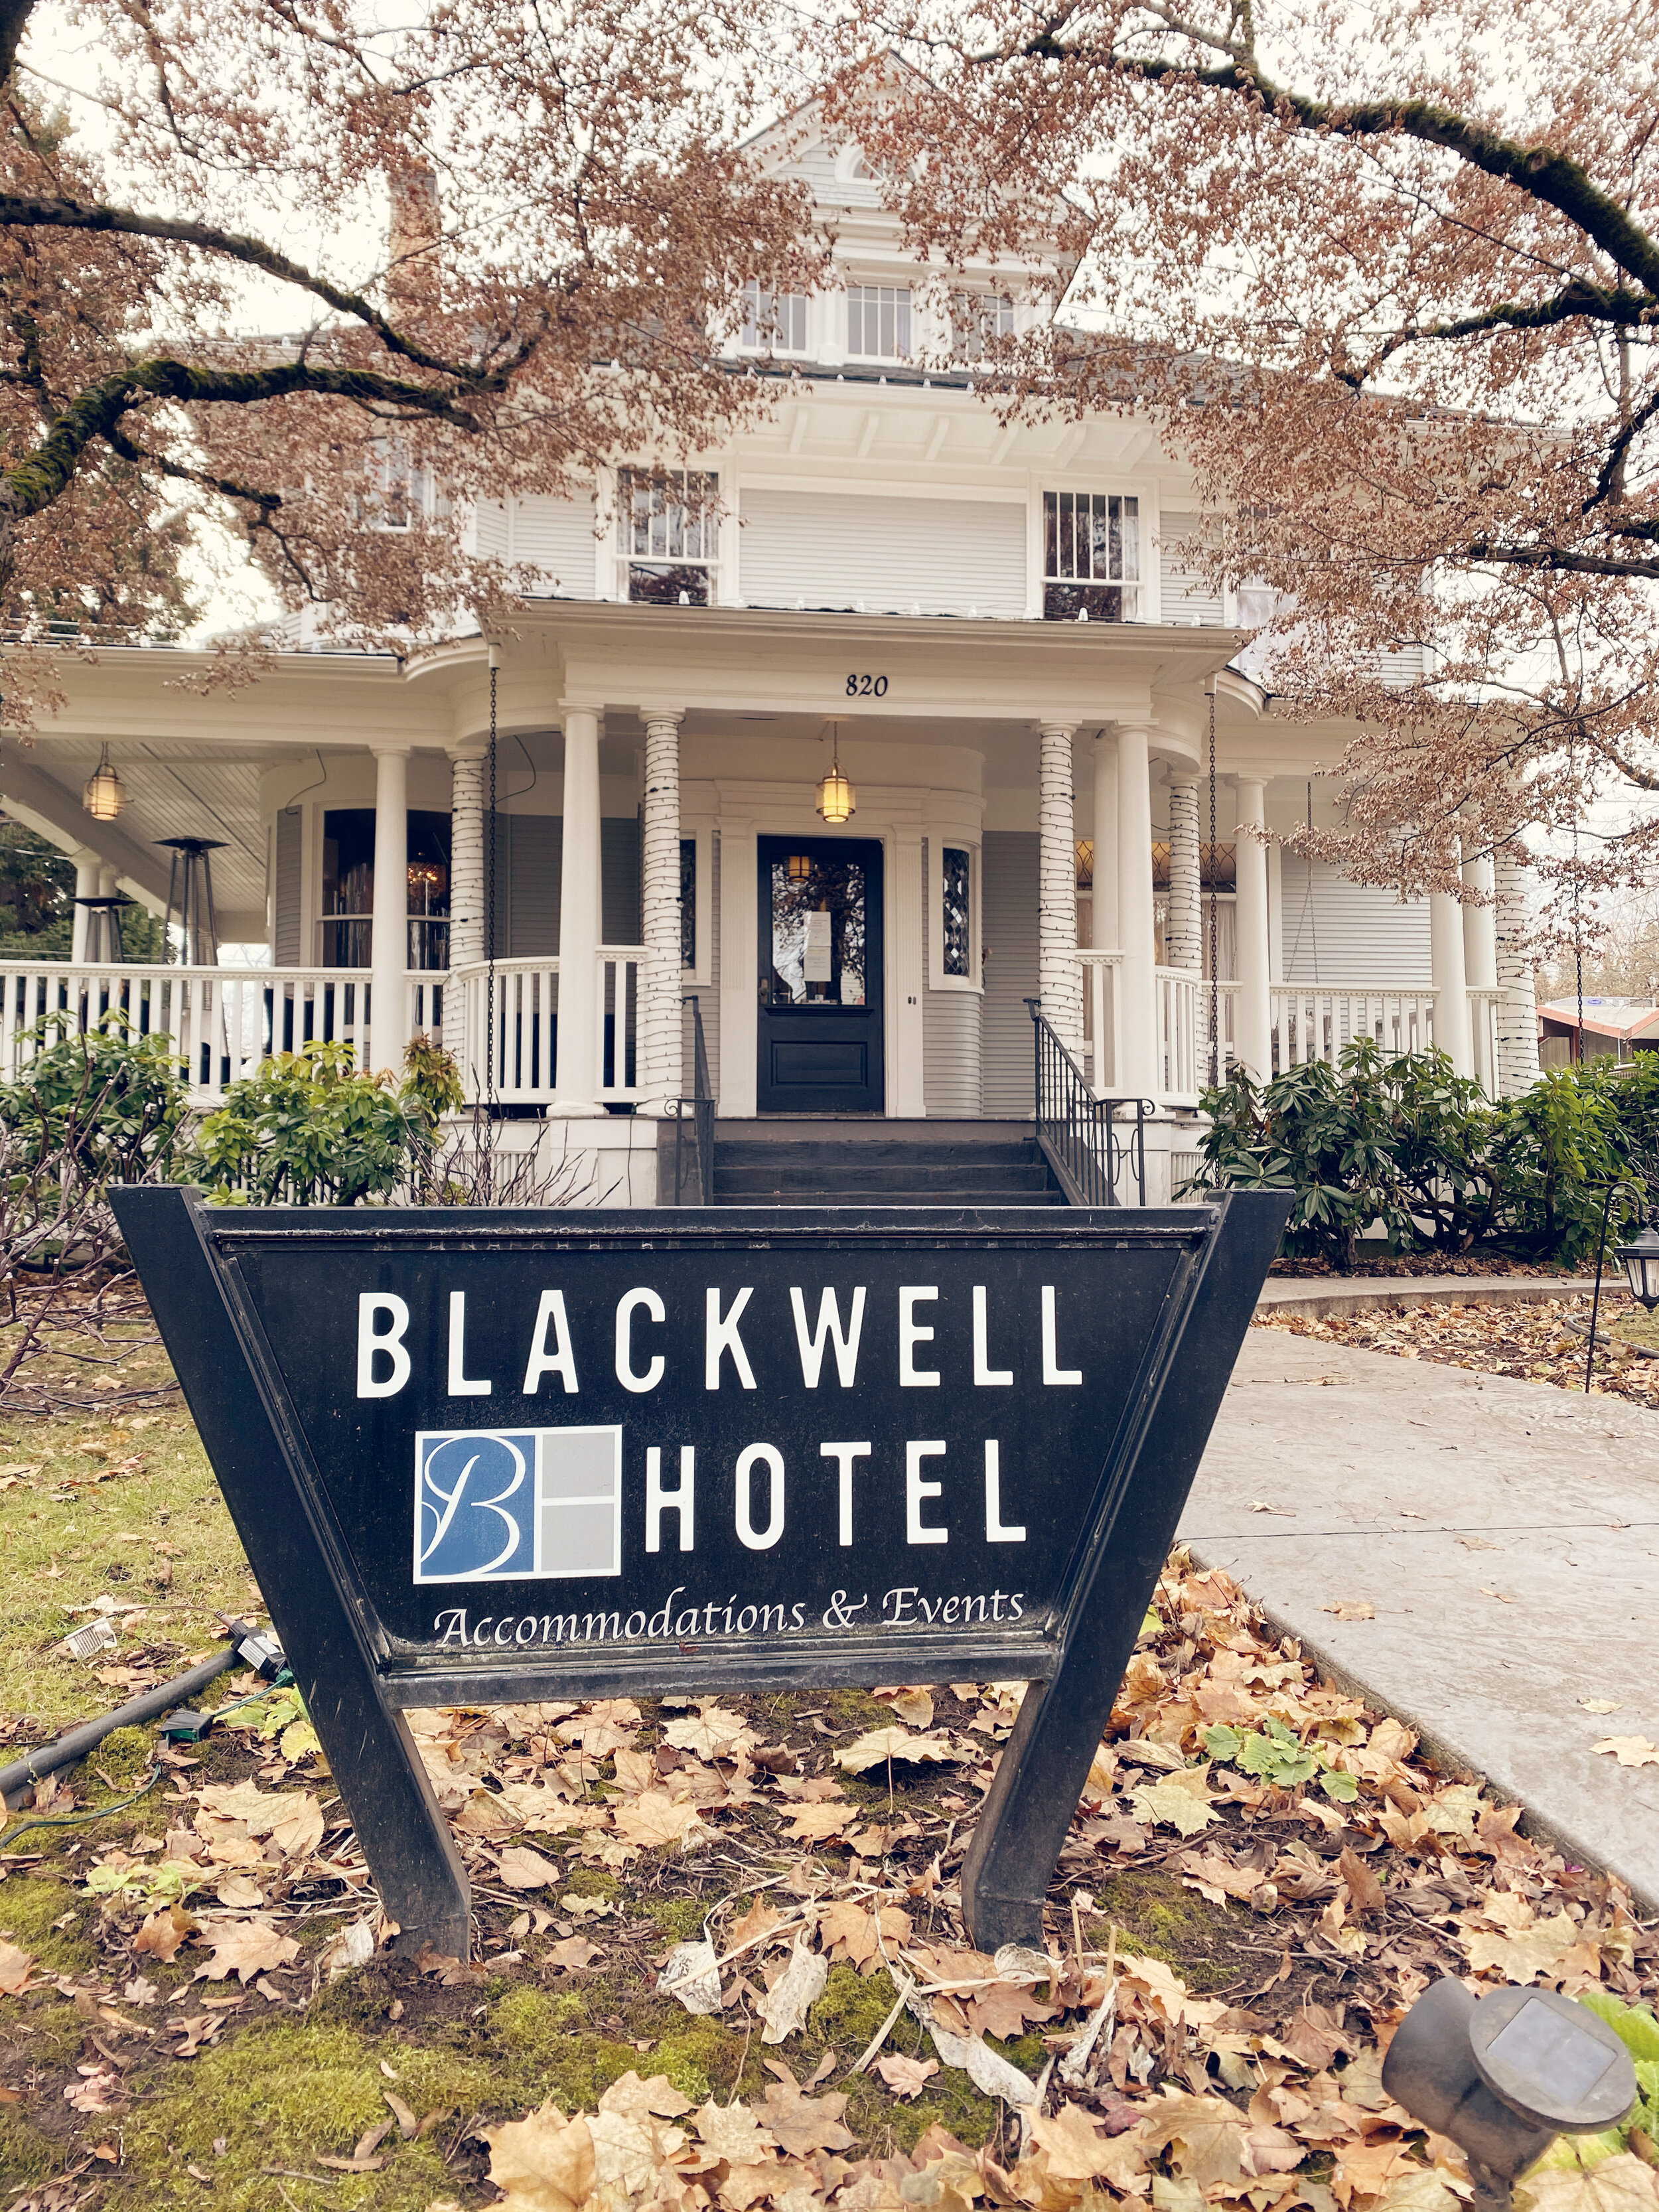 the Blackwell Boutique Hotel in Coeur d'Alene Idaho